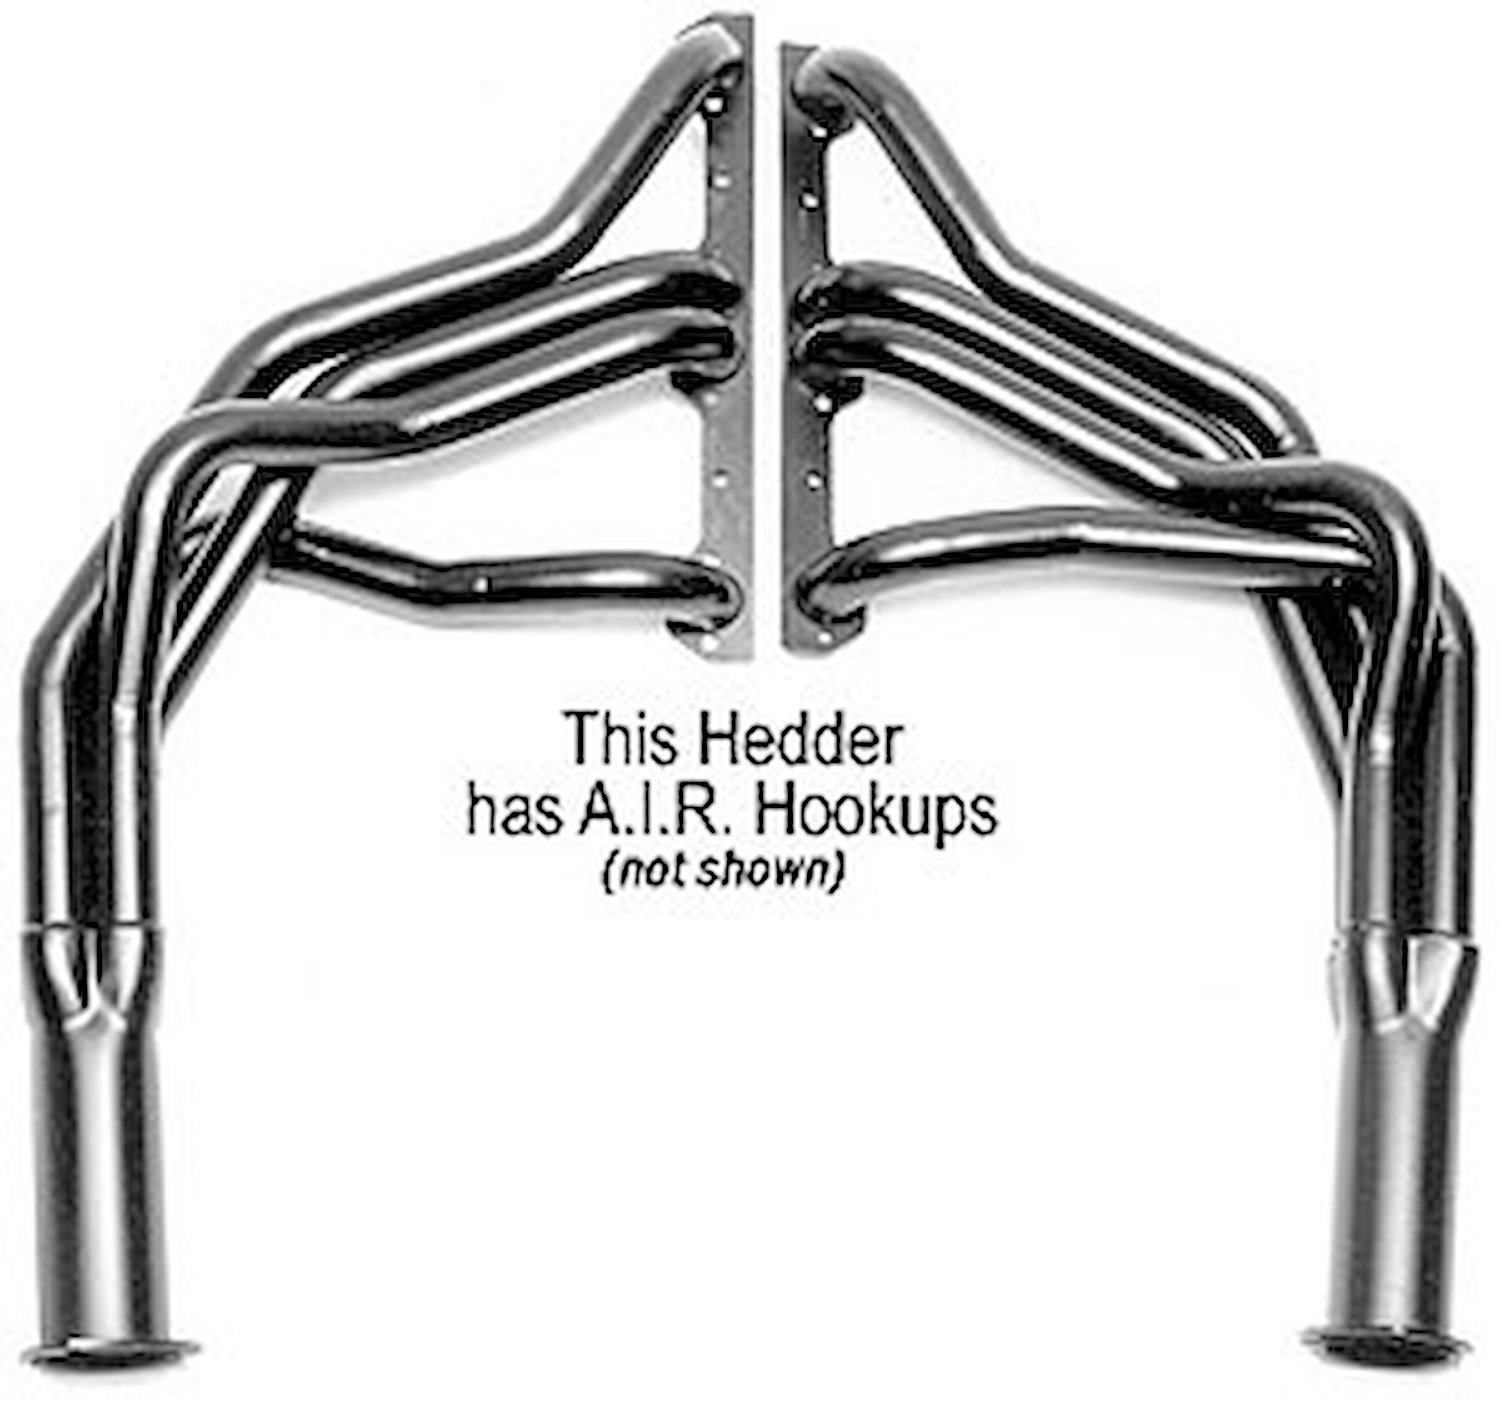 Standard Duty Uncoated Full Length Headers for 1971-91 Chevy G10,G20,G30 & Class C Motorhome